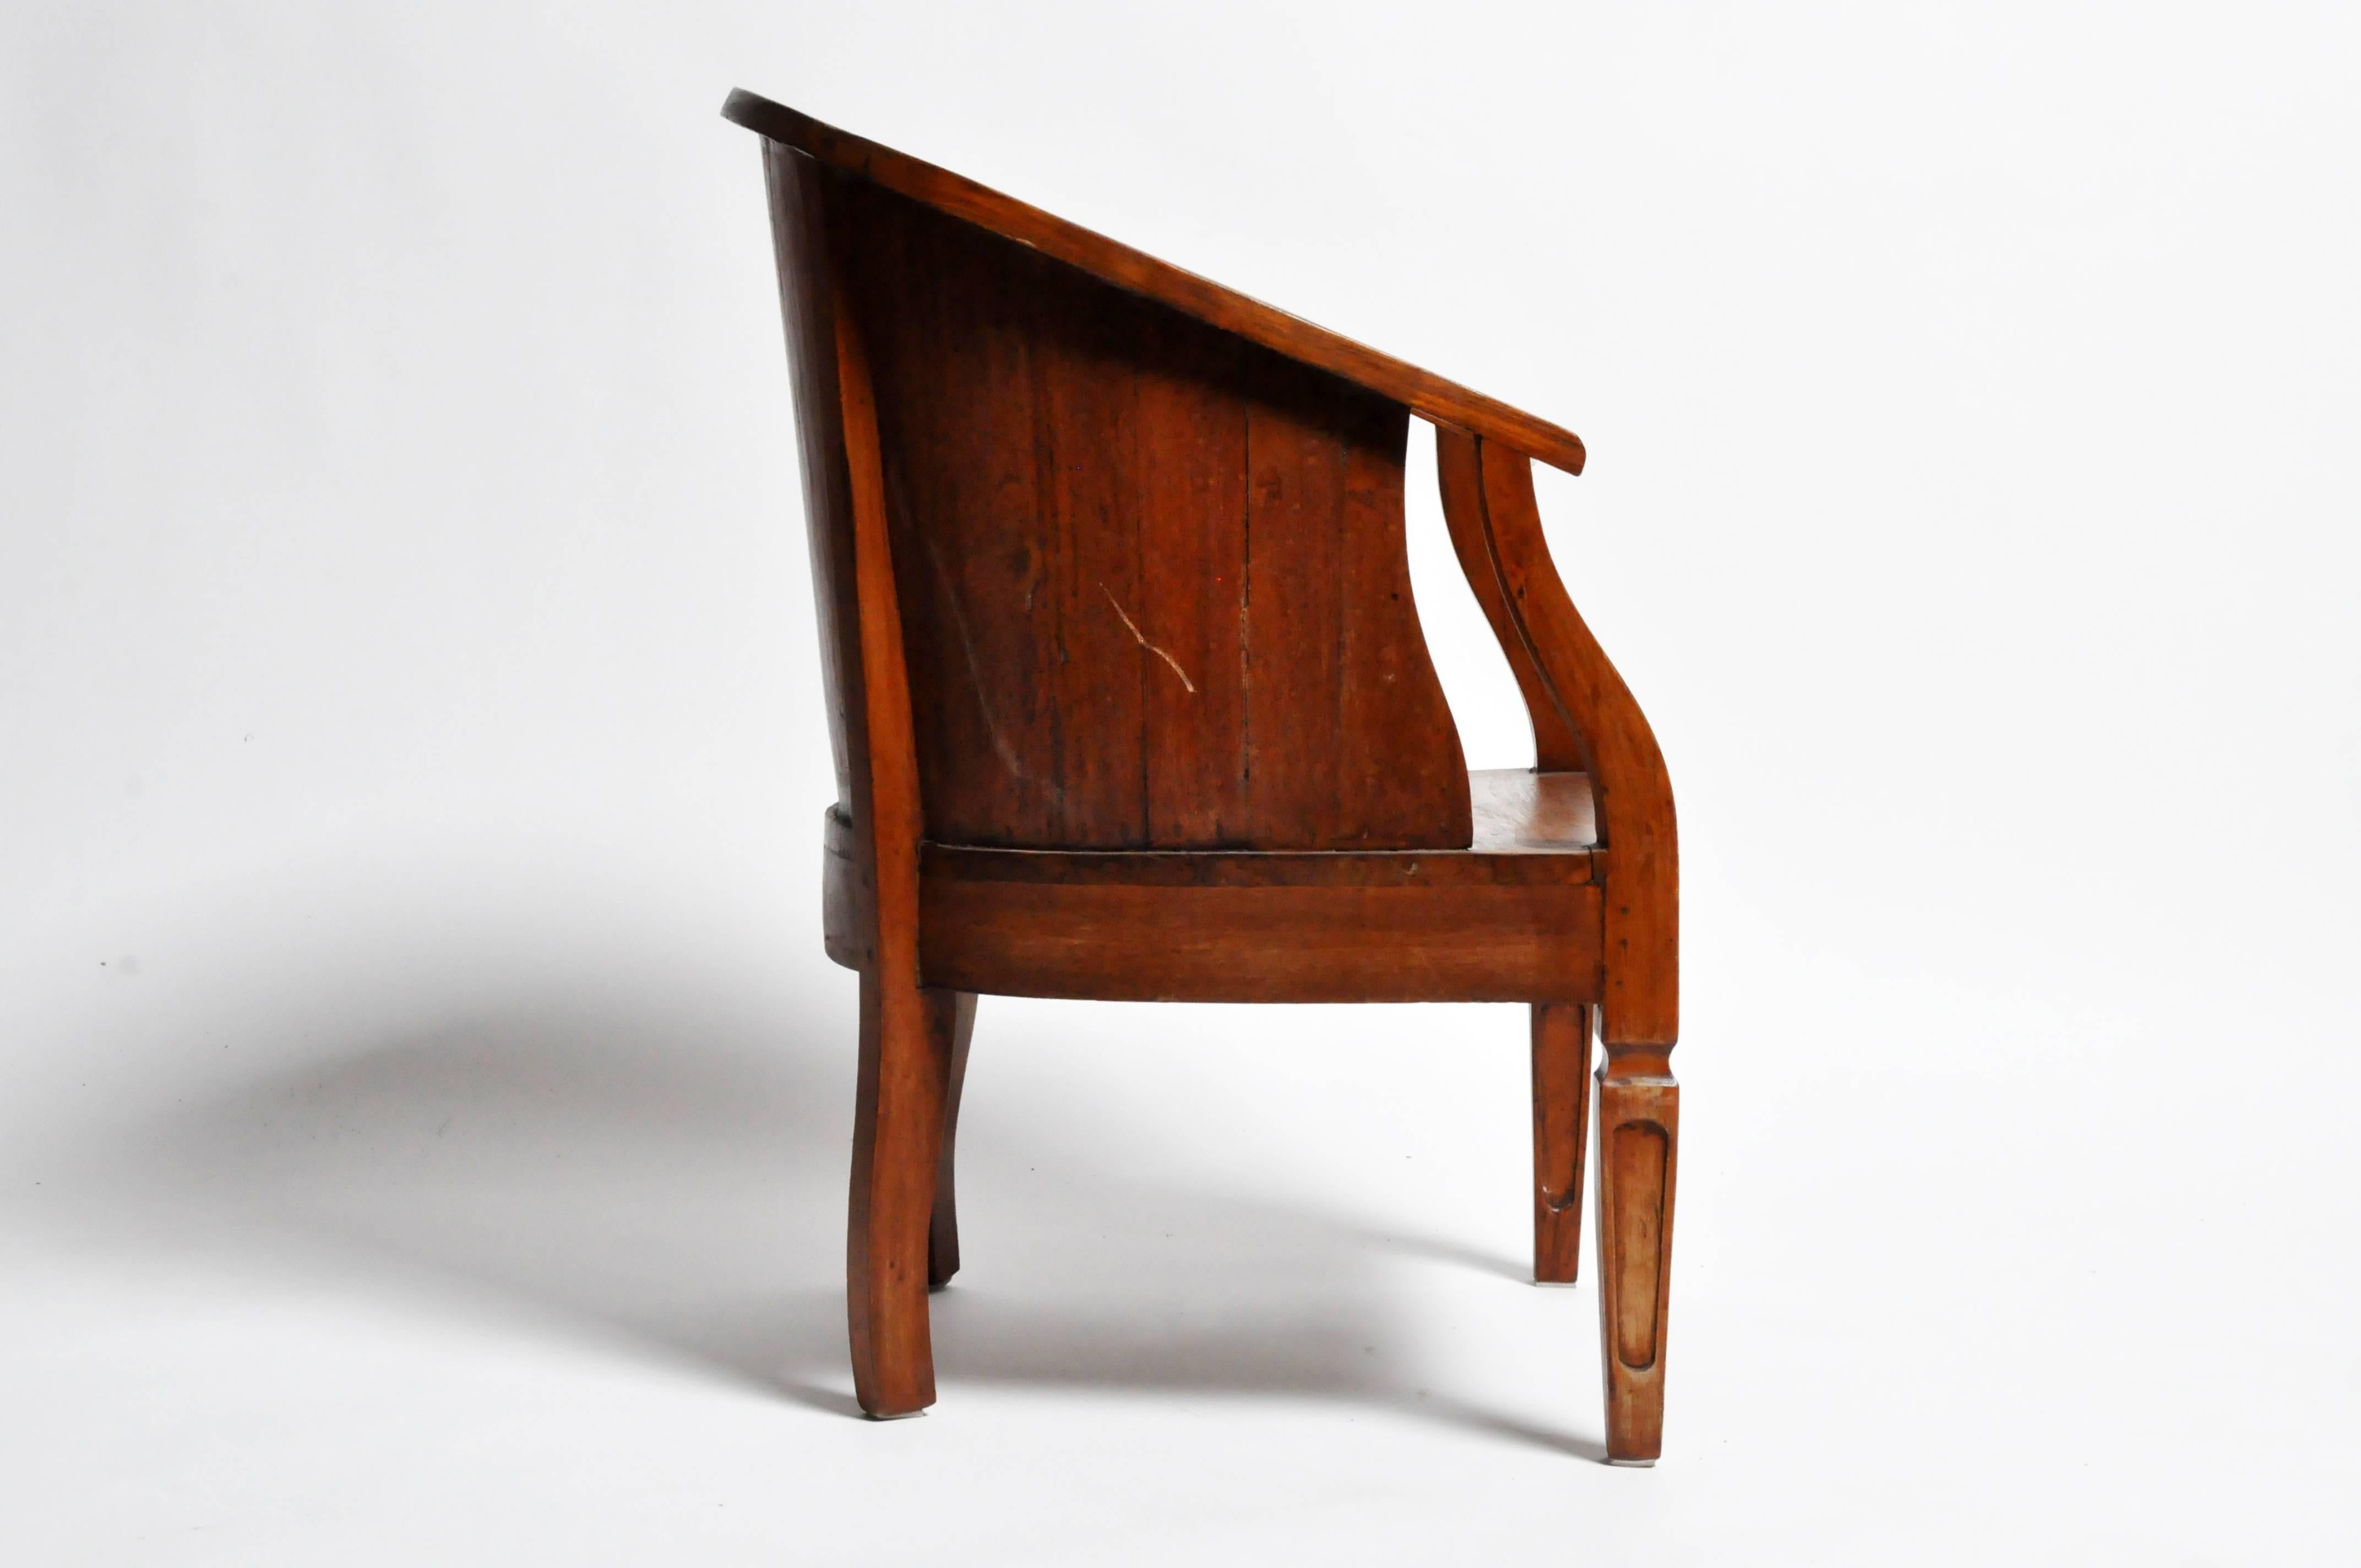 british colonial chairs